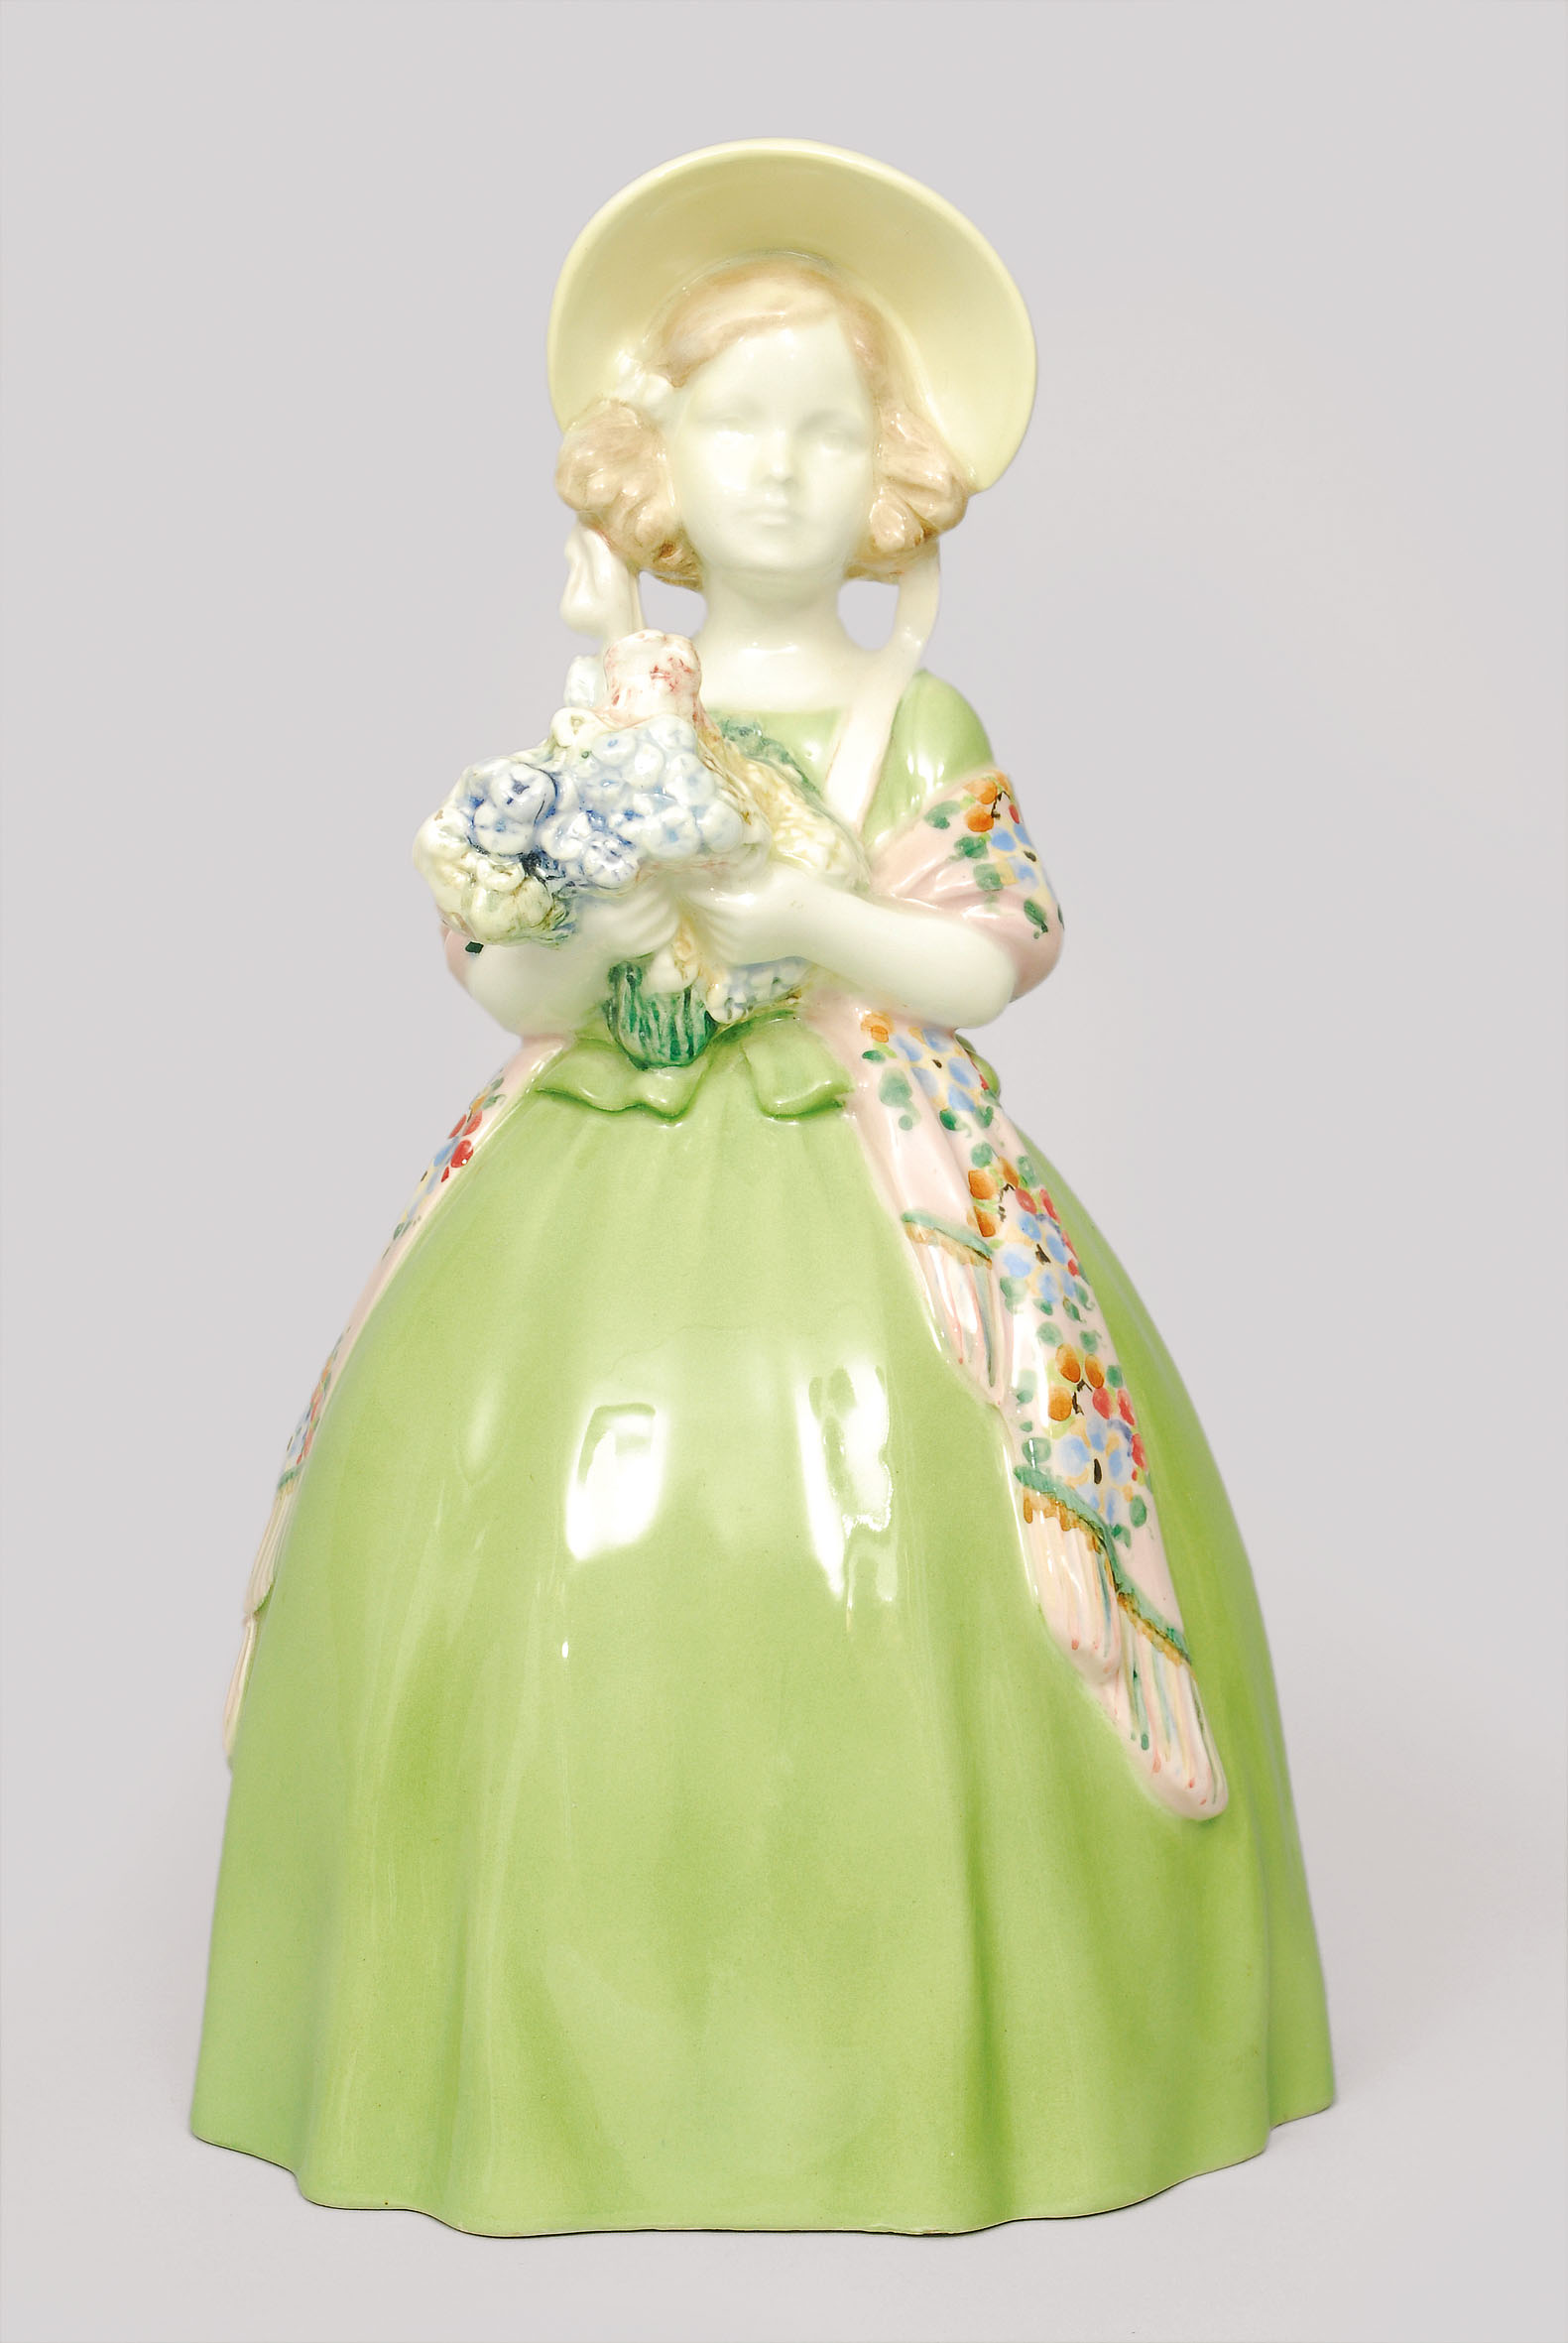 A figurine 'Biedermeier' girl with hat and bouquet